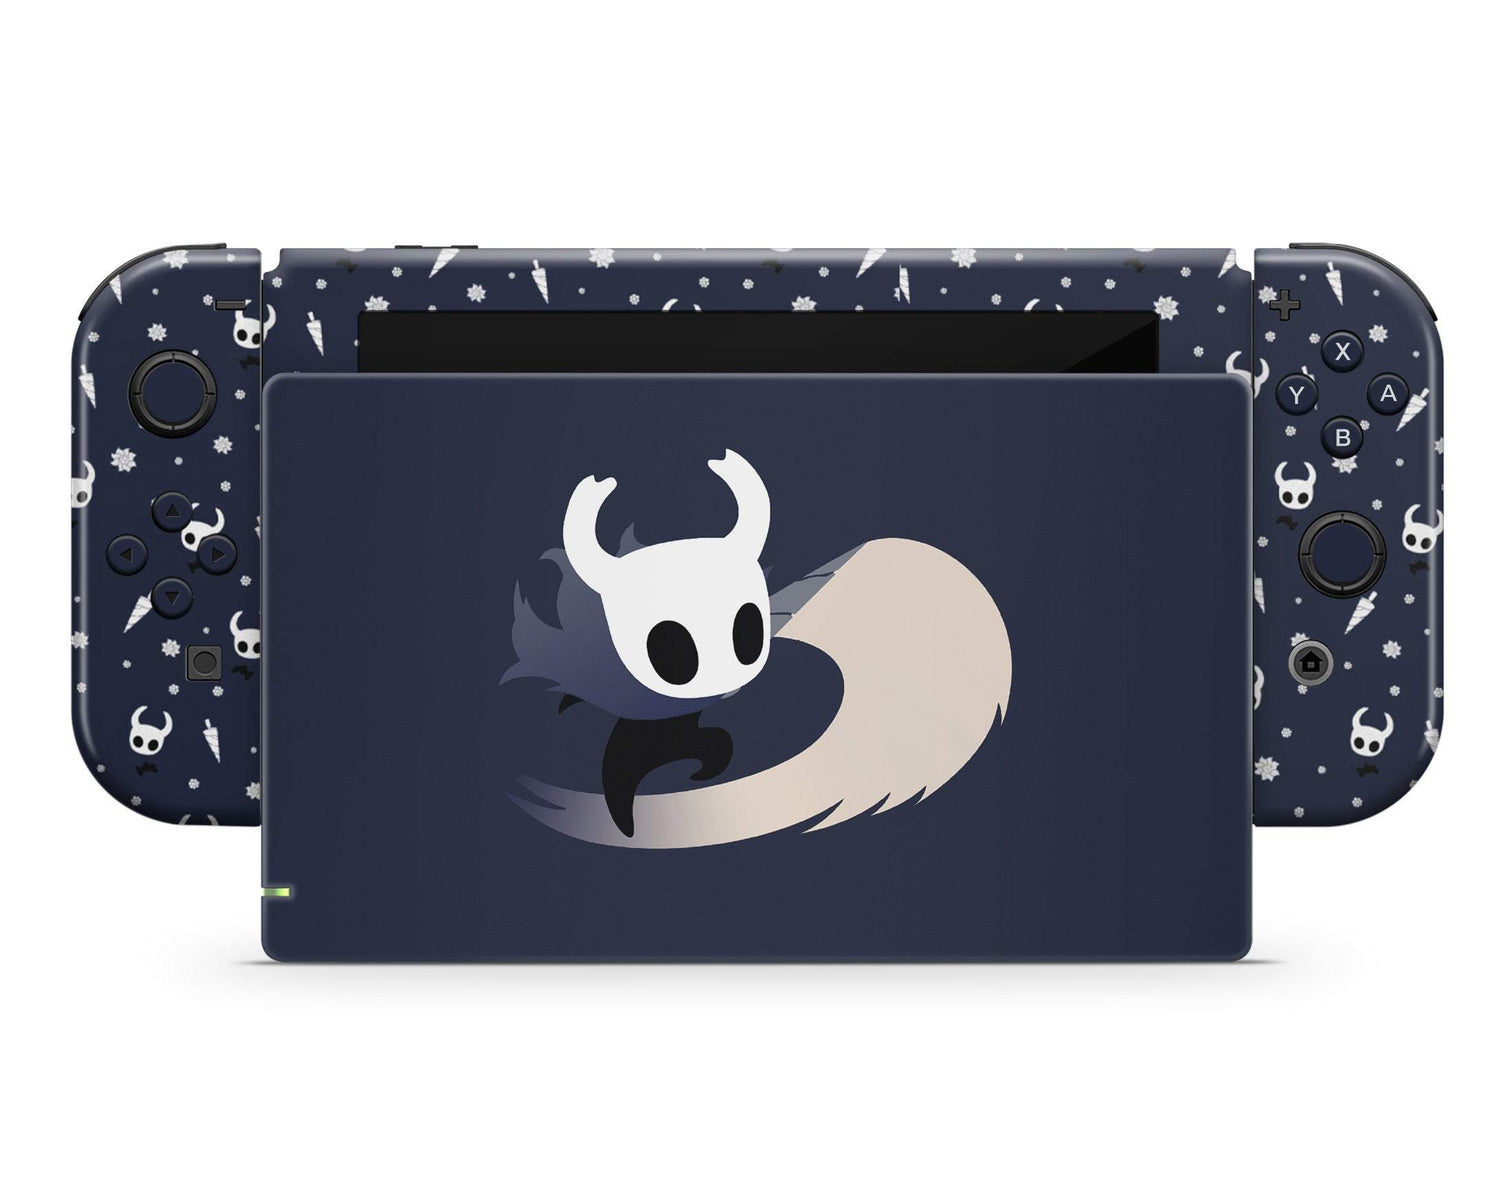 Hollow Knight Navy Nintendo Switch – Lux Skin Skins Official